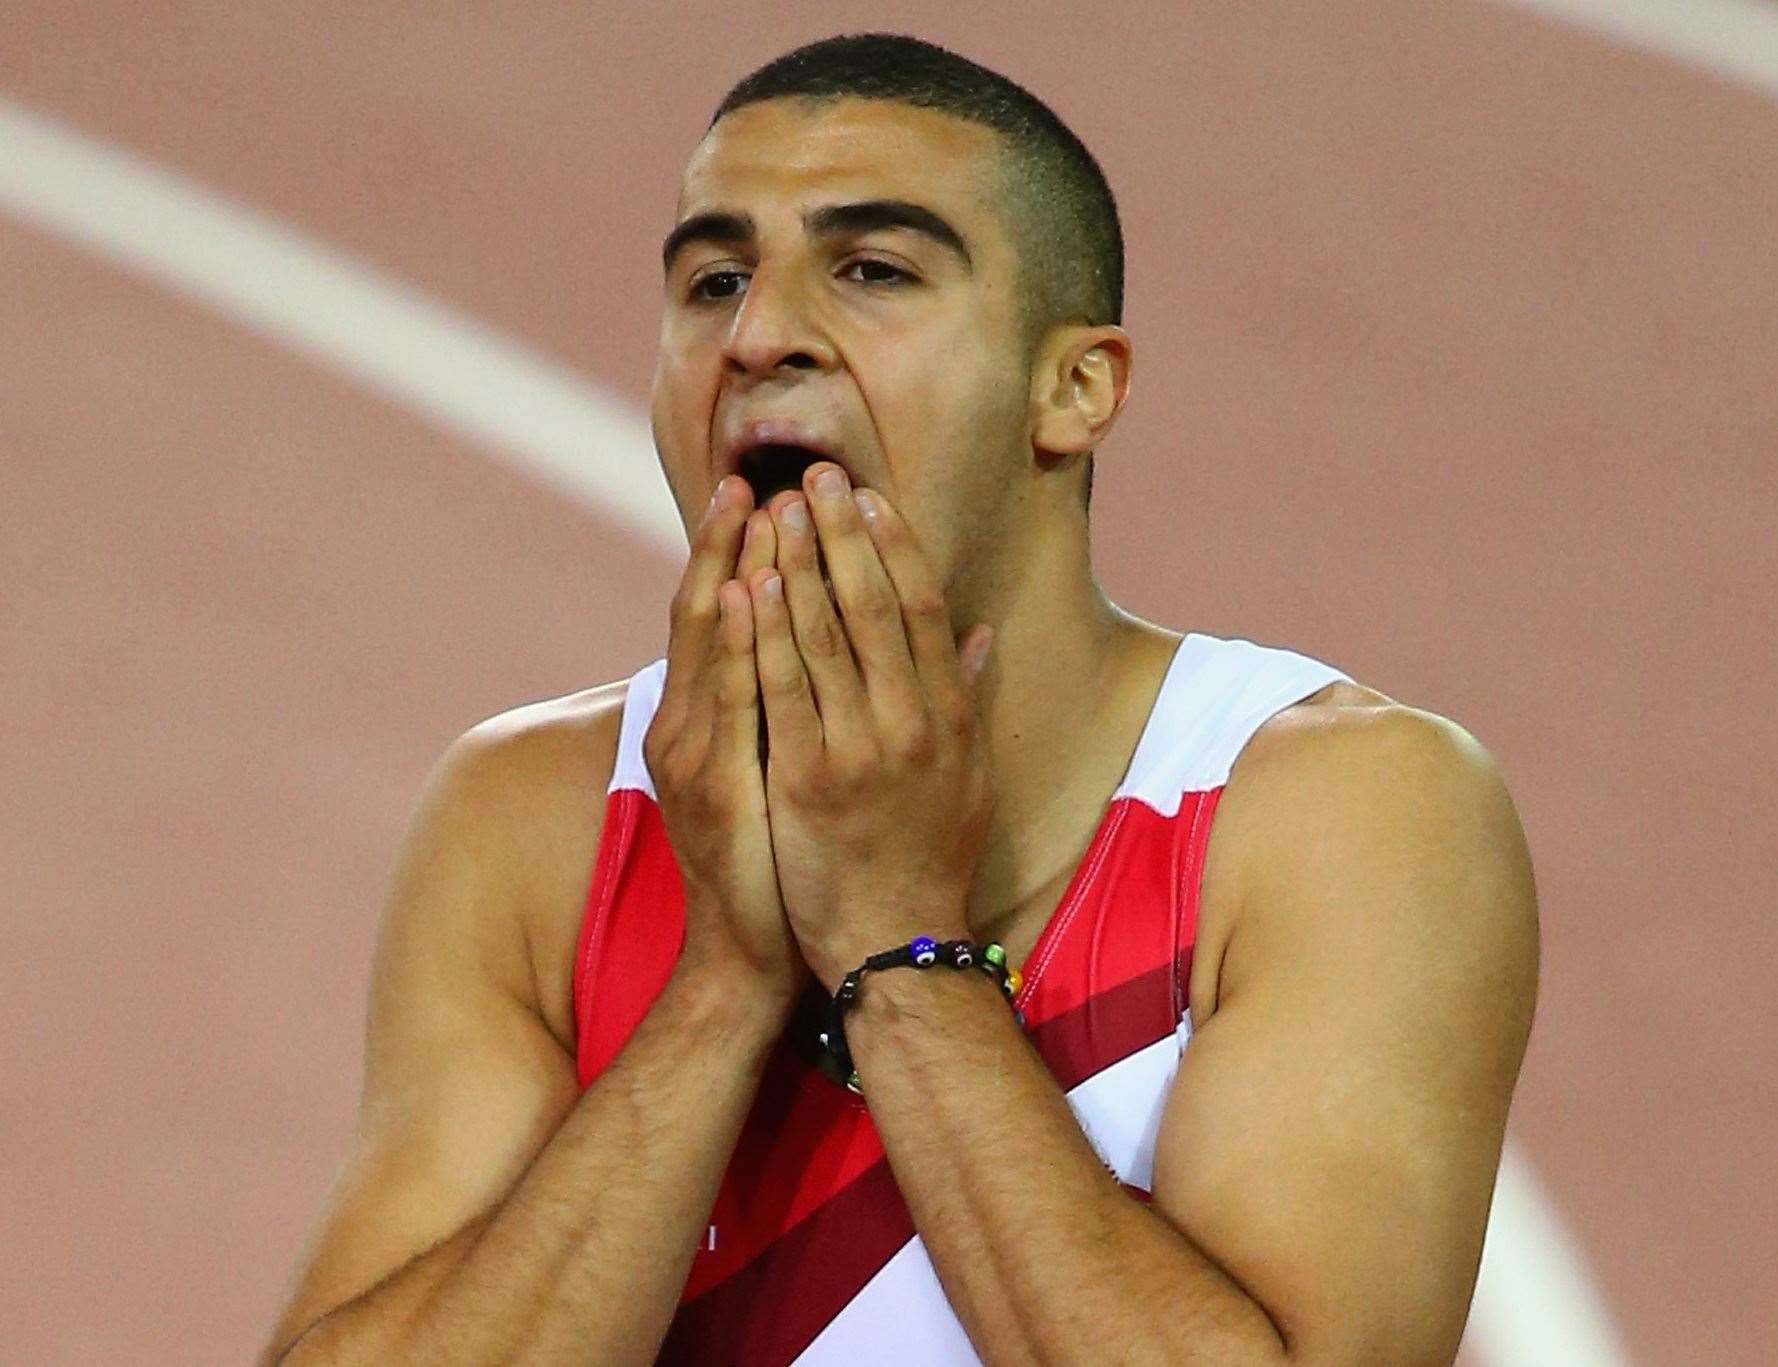 Adam Gemili's medal hopes were dashed Picture: Robert Cianflone/Getty Images